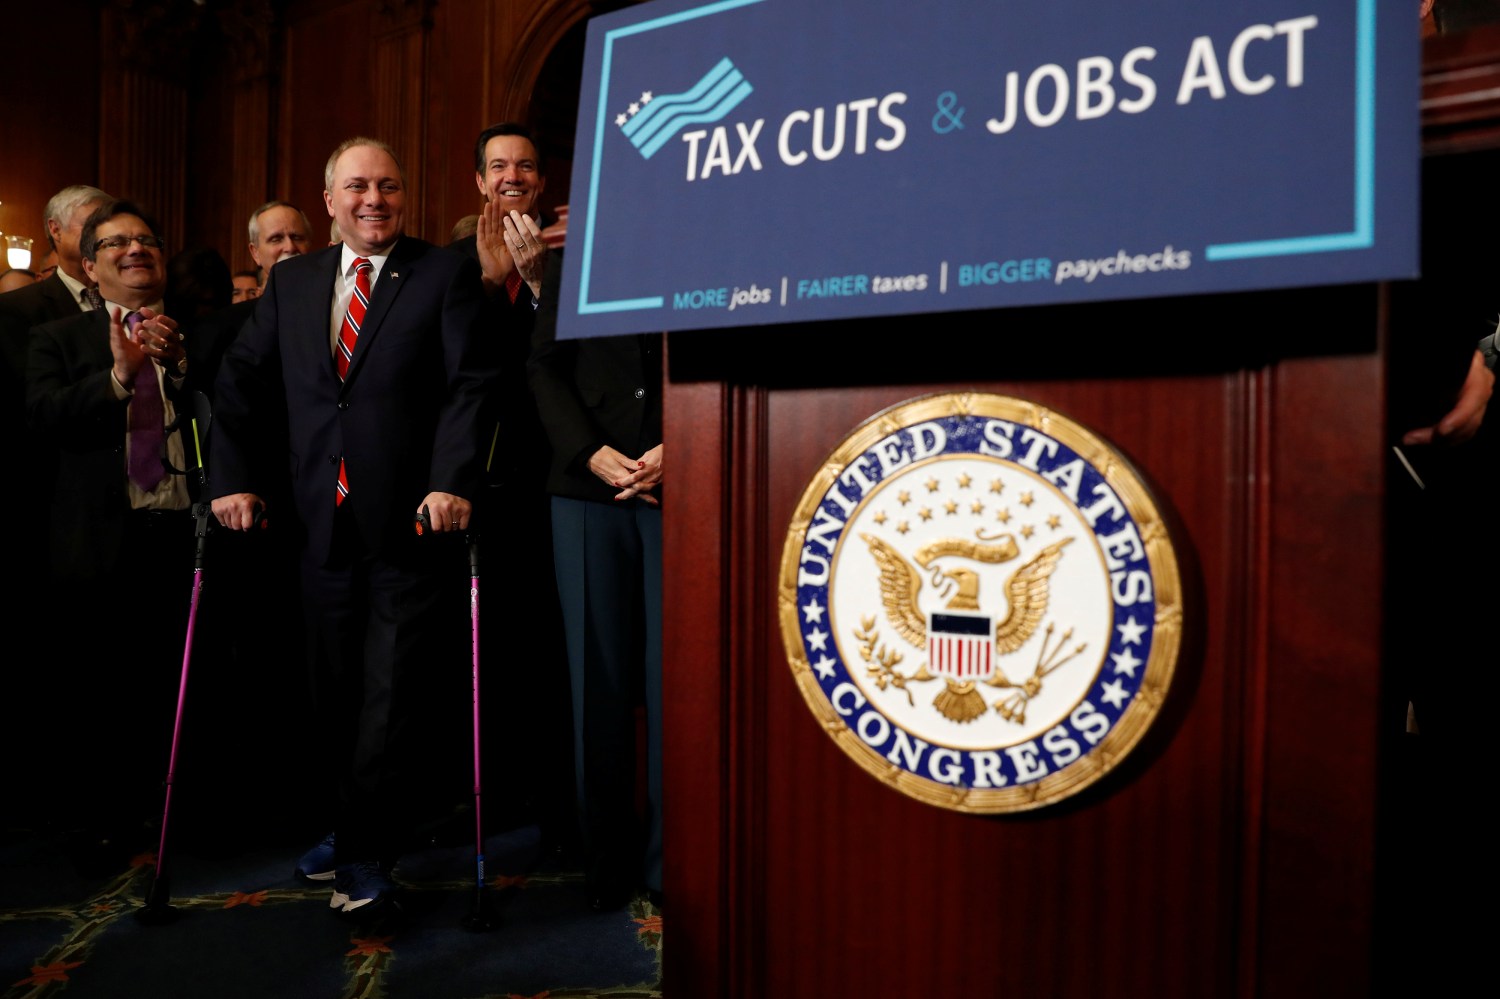 House Majority Whip Rep. Steve Scalise (R-LA) looks on during a news conference announcing the passage of the "Tax Cuts and Jobs Act" at the U.S. Capitol in Washington, U.S., November 16, 2017. REUTERS/Aaron P. Bernstein - RC1B213C57E0